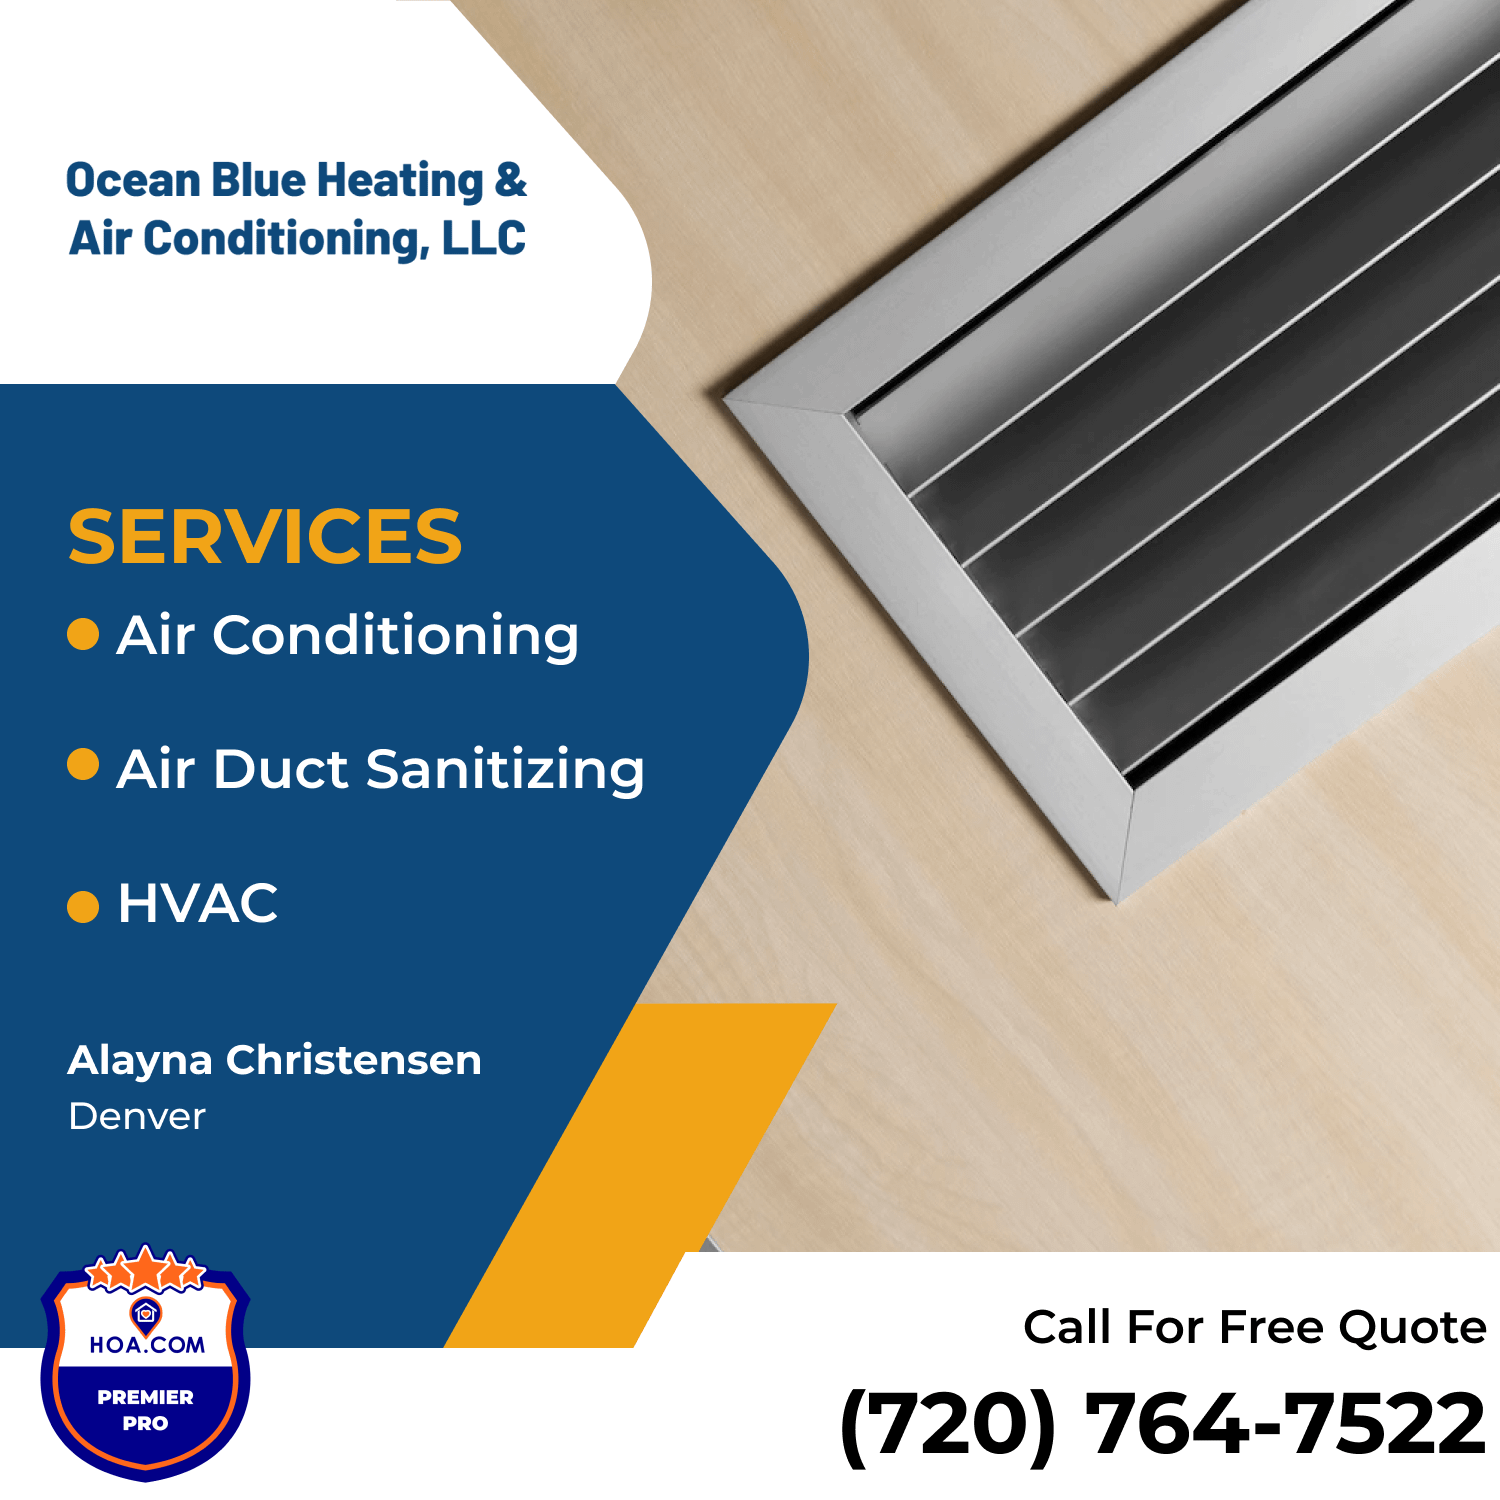 Ocean Blue Heating & Air Conditioning, LLC Services